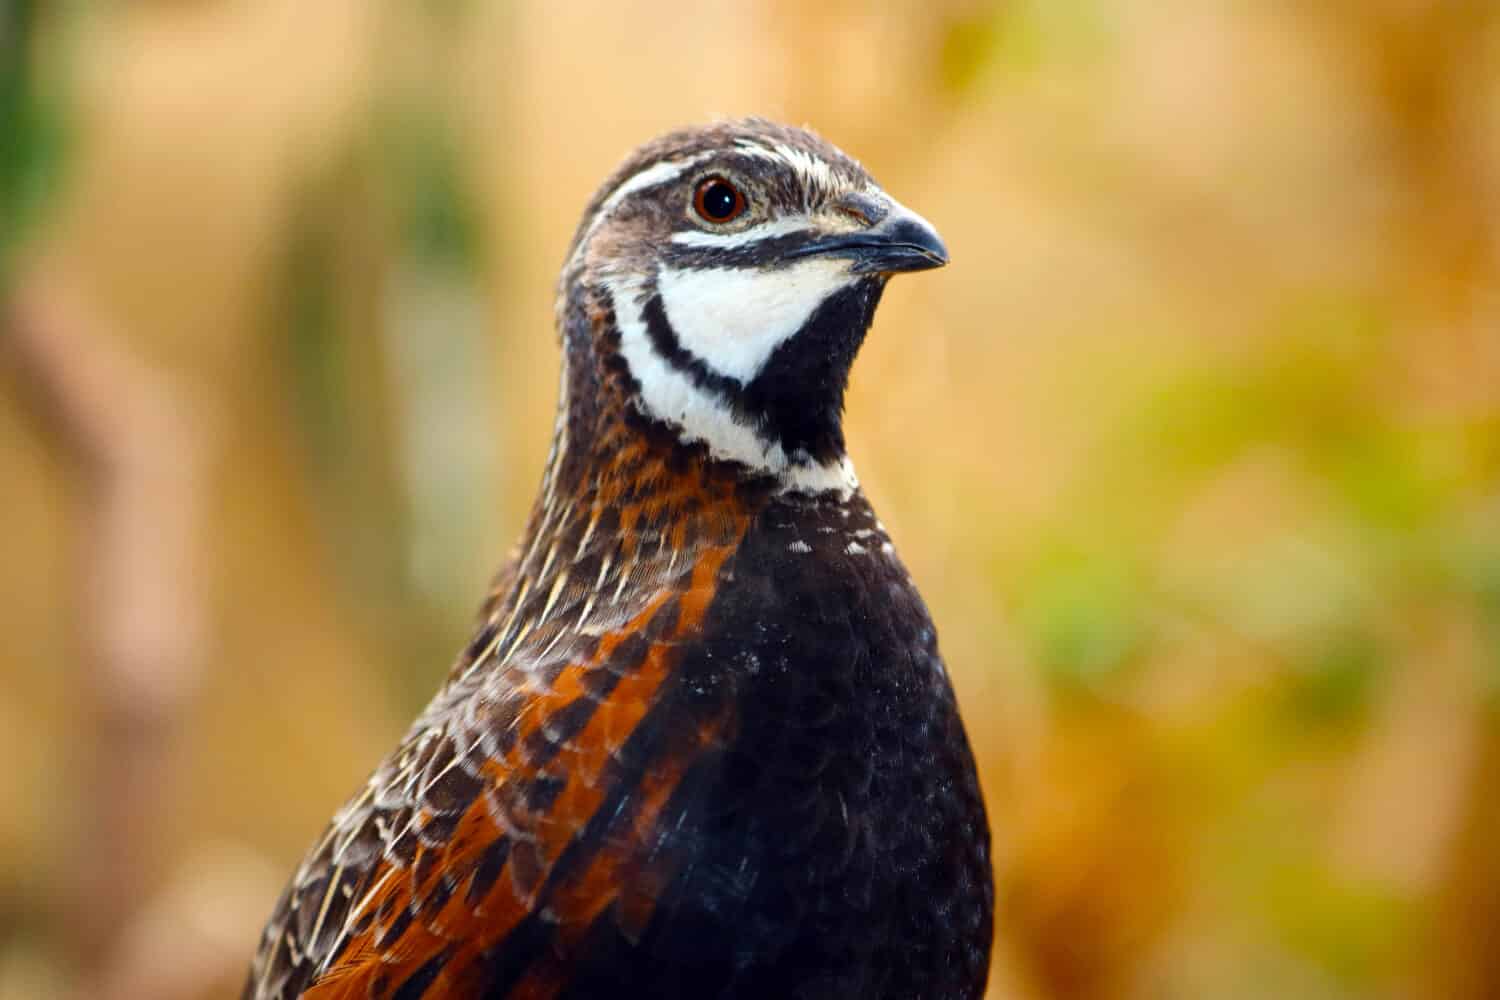 Portrait of a king quail (synoicus chinensis) in profile view